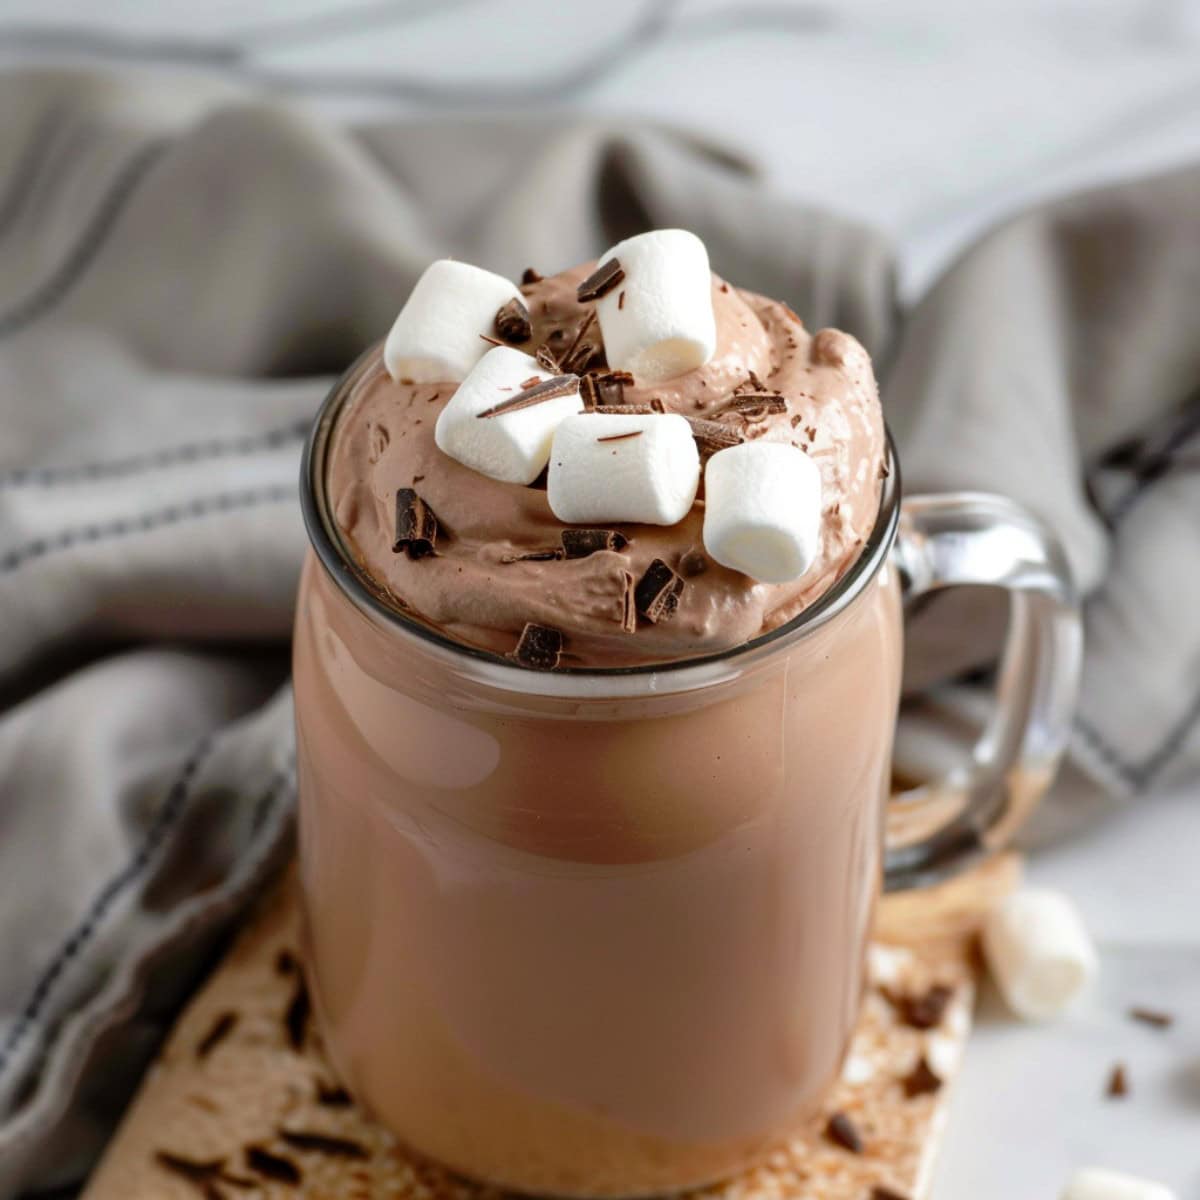 A glass jar of creamy and decadent hot chocolate whipped cream